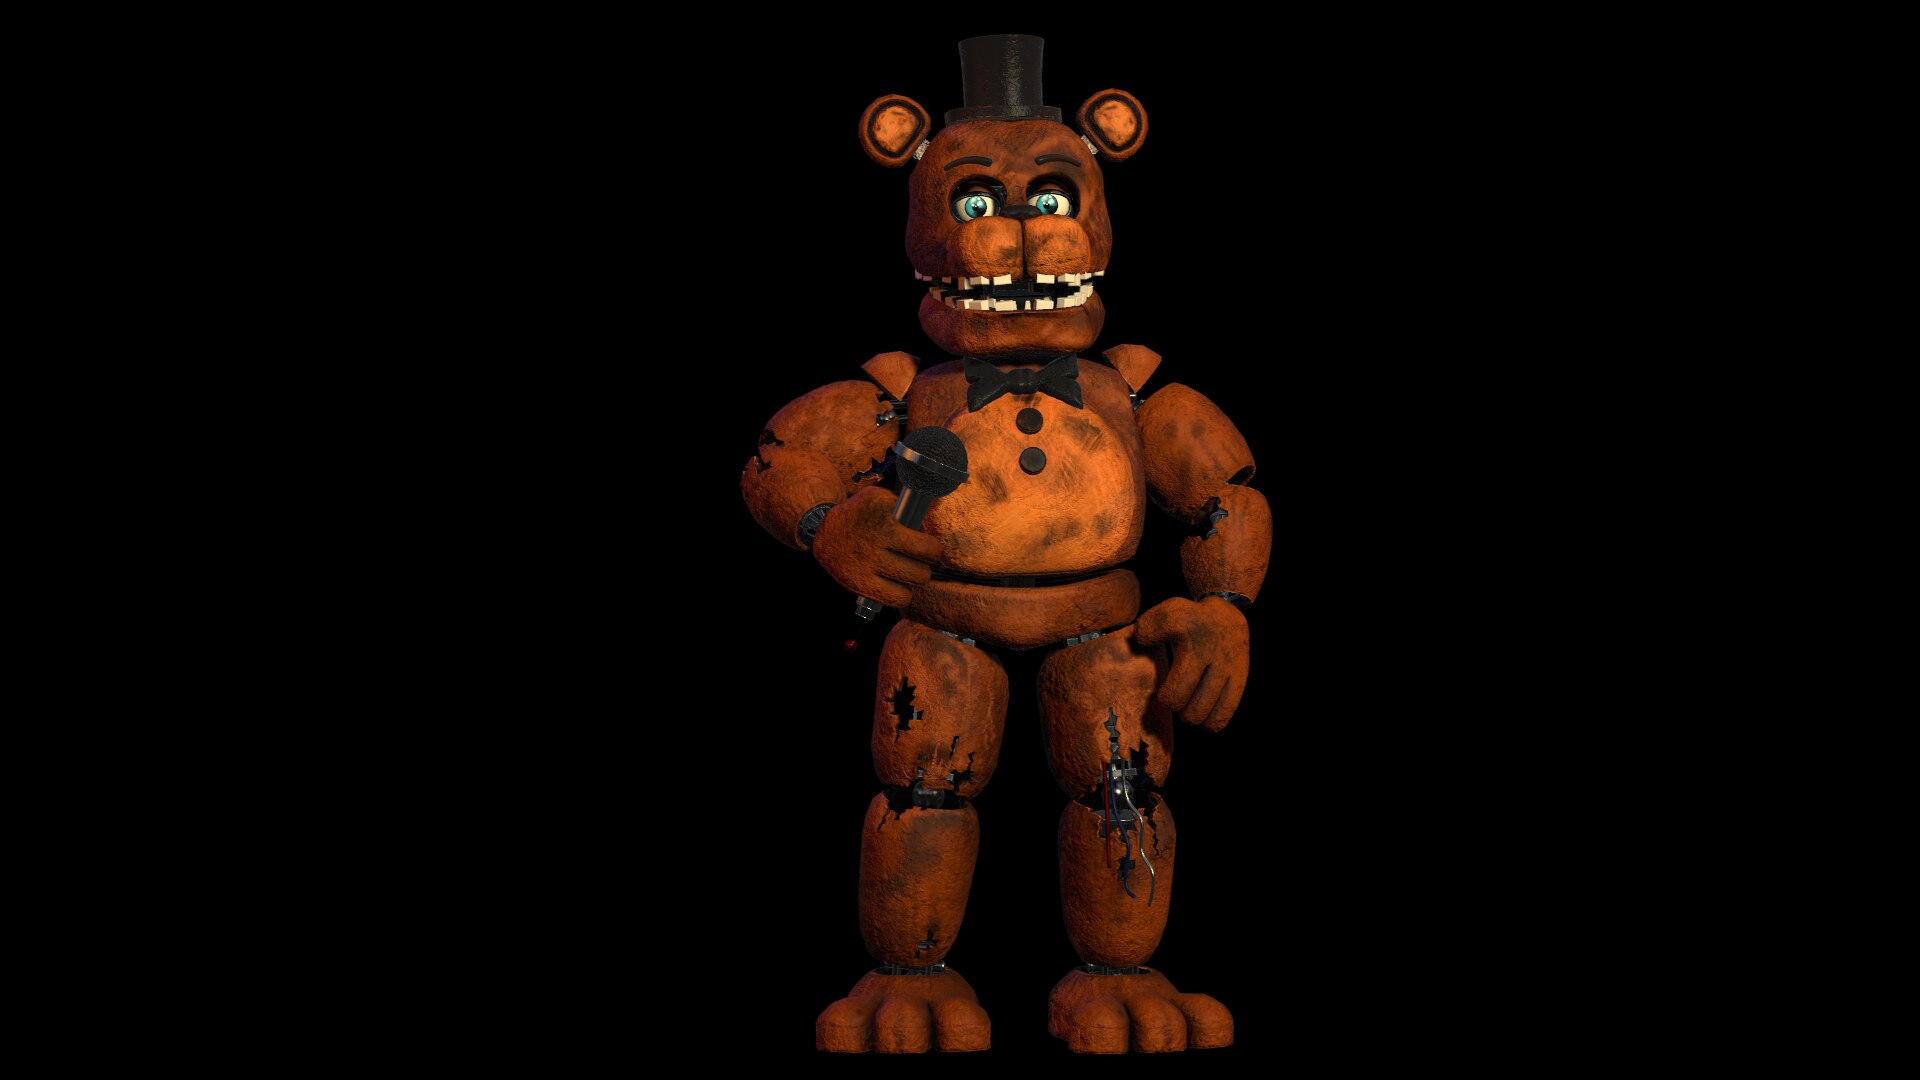 Help Wanted Withered Freddy Side Pack